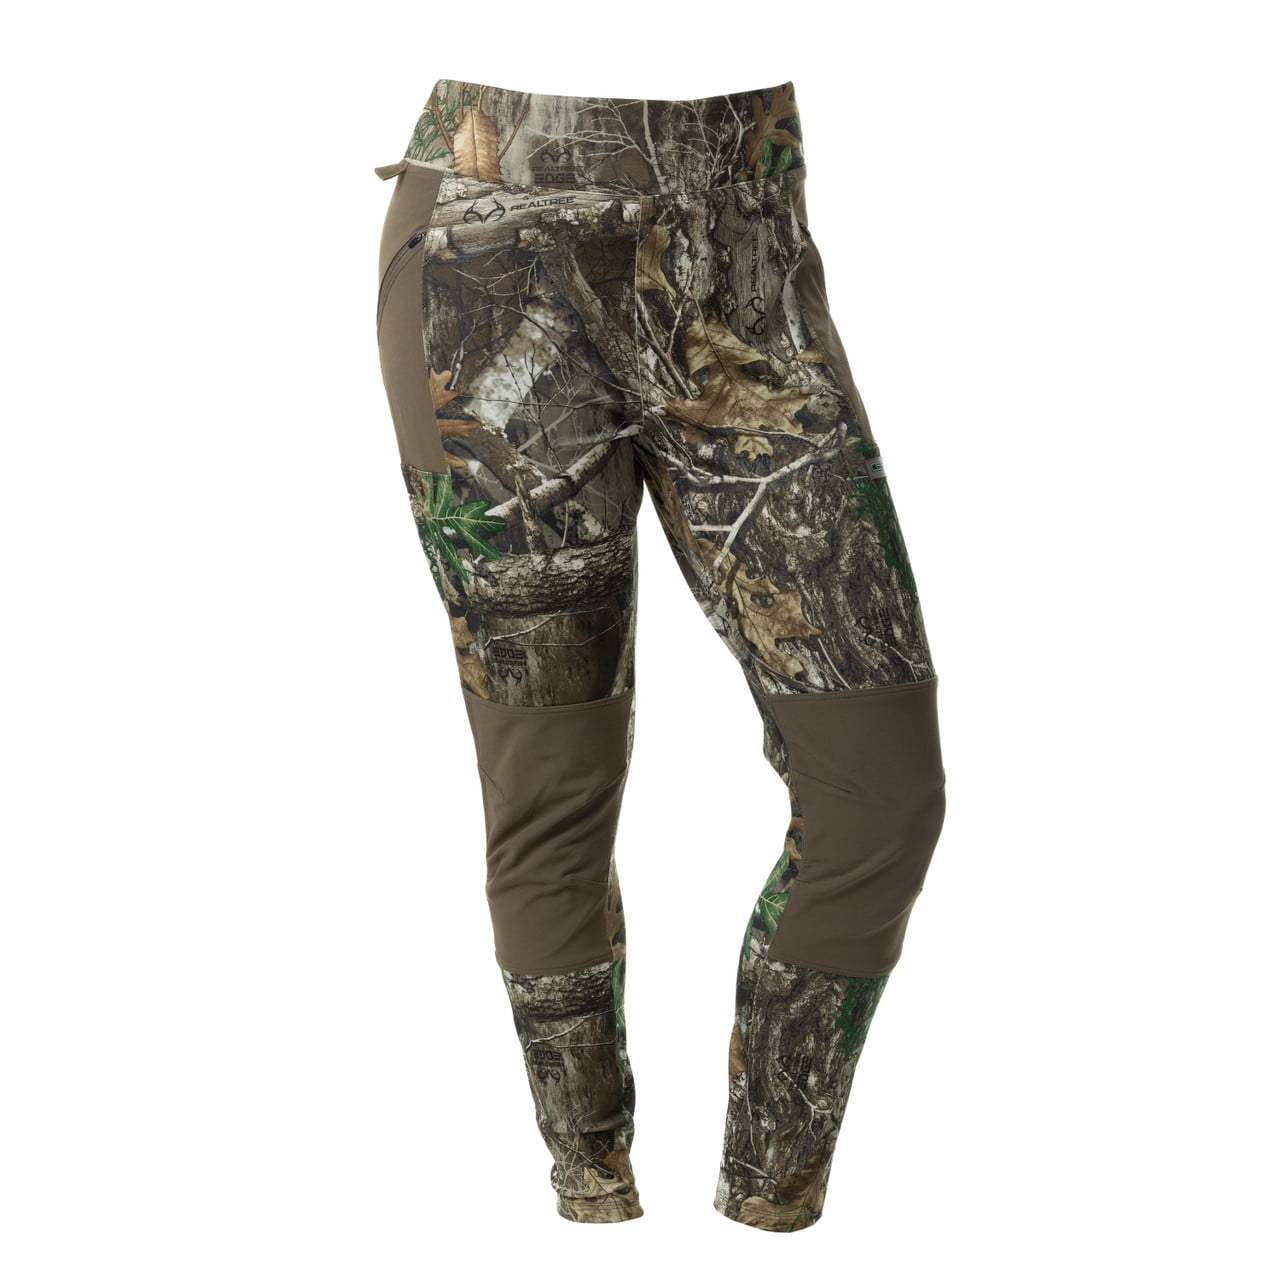 DSG Outerwear Foraging Legging - Women's, Extra Small, Realtree